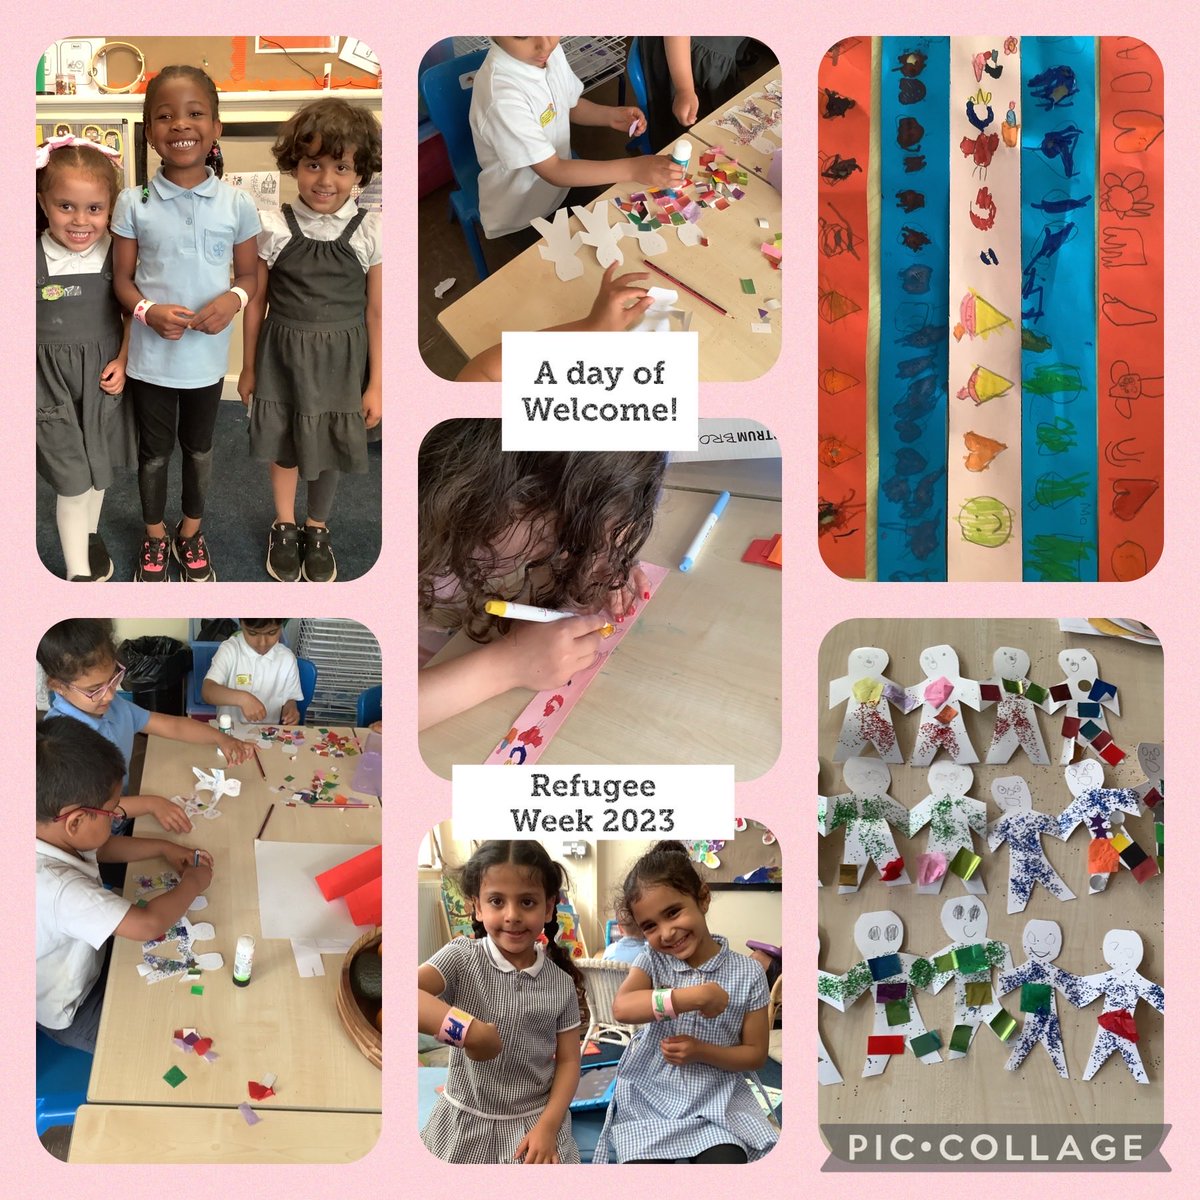 Today in our Day of Welcome for #Refugeeweek we thought carefully about different ways to welcome everyone to our school of sanctuary🌟Reception wanted to make friendship bracelets & we discussed the importance of needing a good friend #everyoneiswelcome ⁦⁦@SMTVCardiff⁩